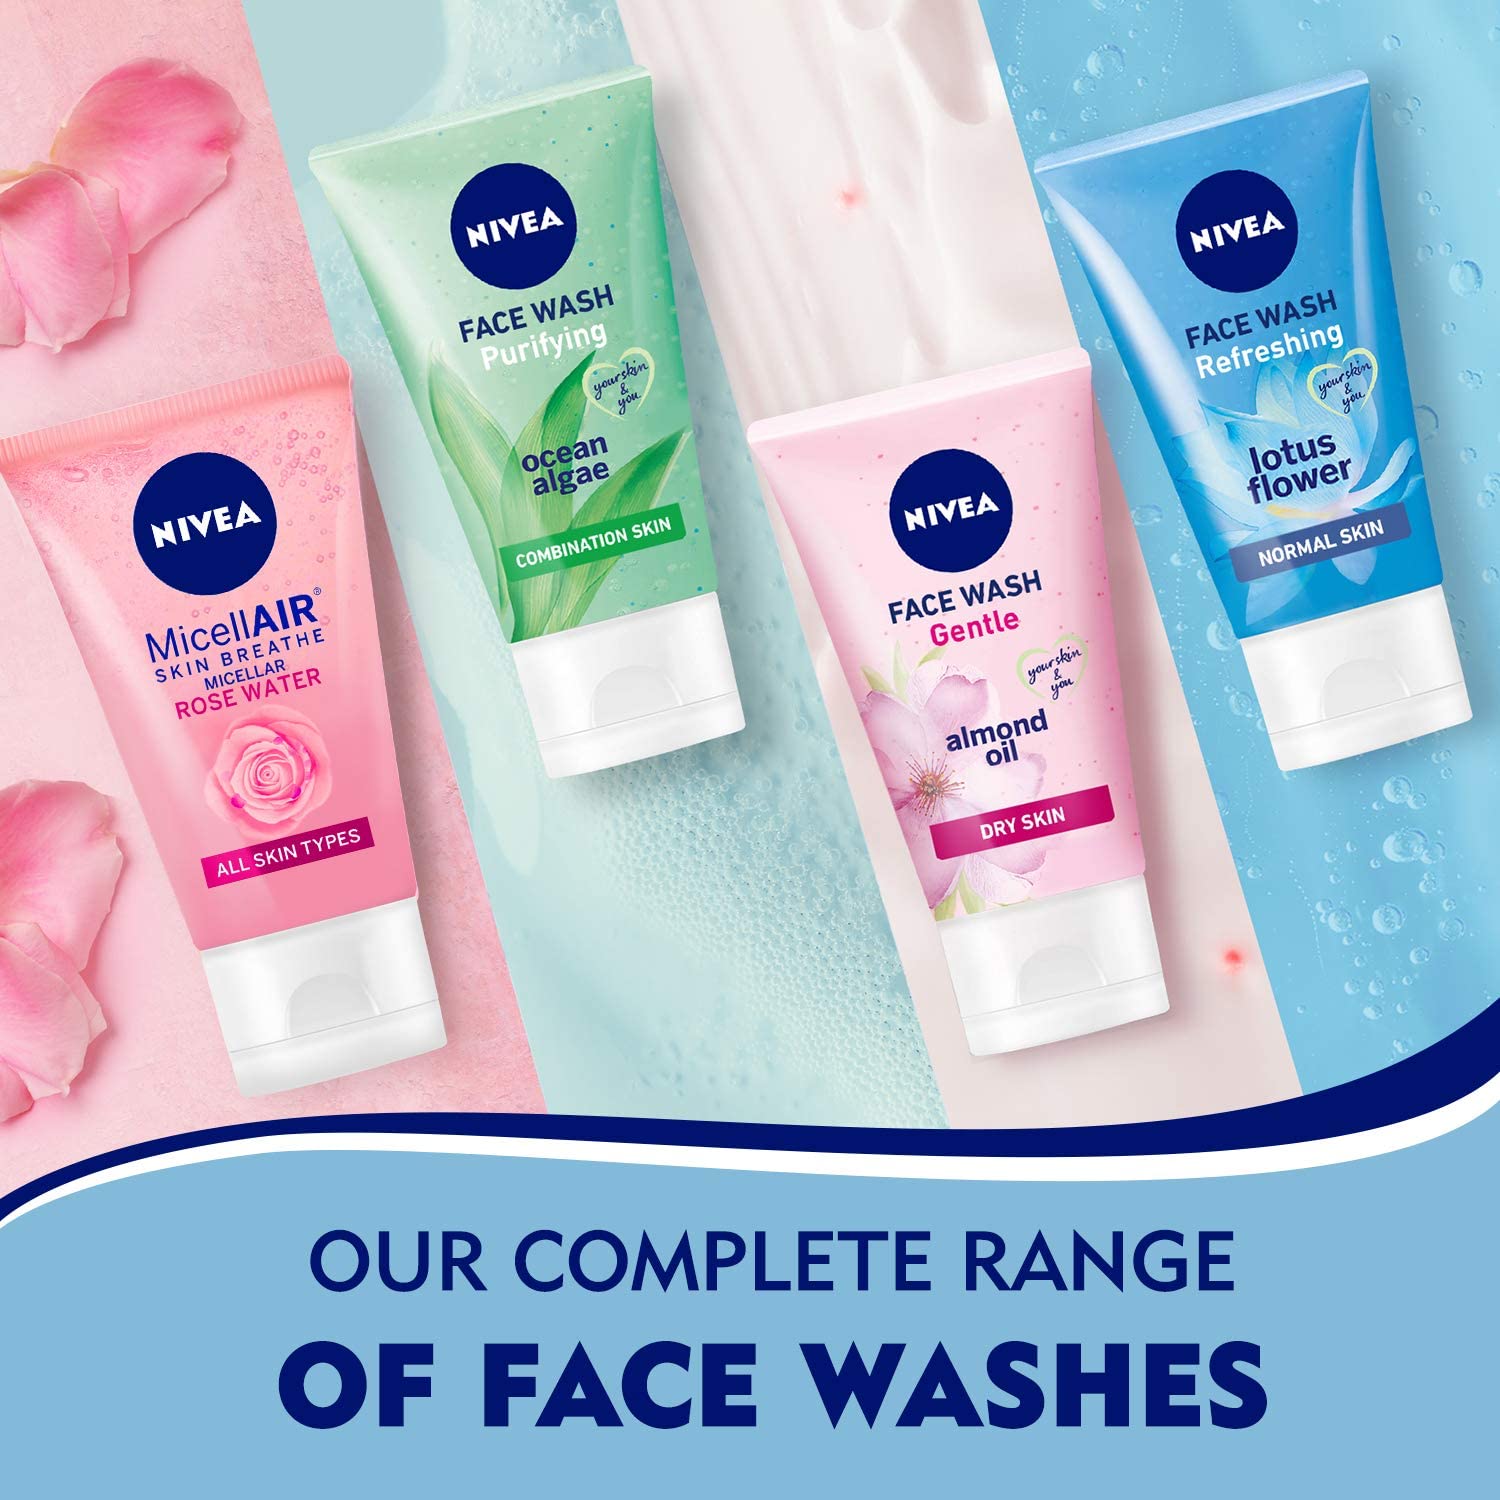 NIVEA Face Wash Cleanser Refreshing Cleansing Normal Skin